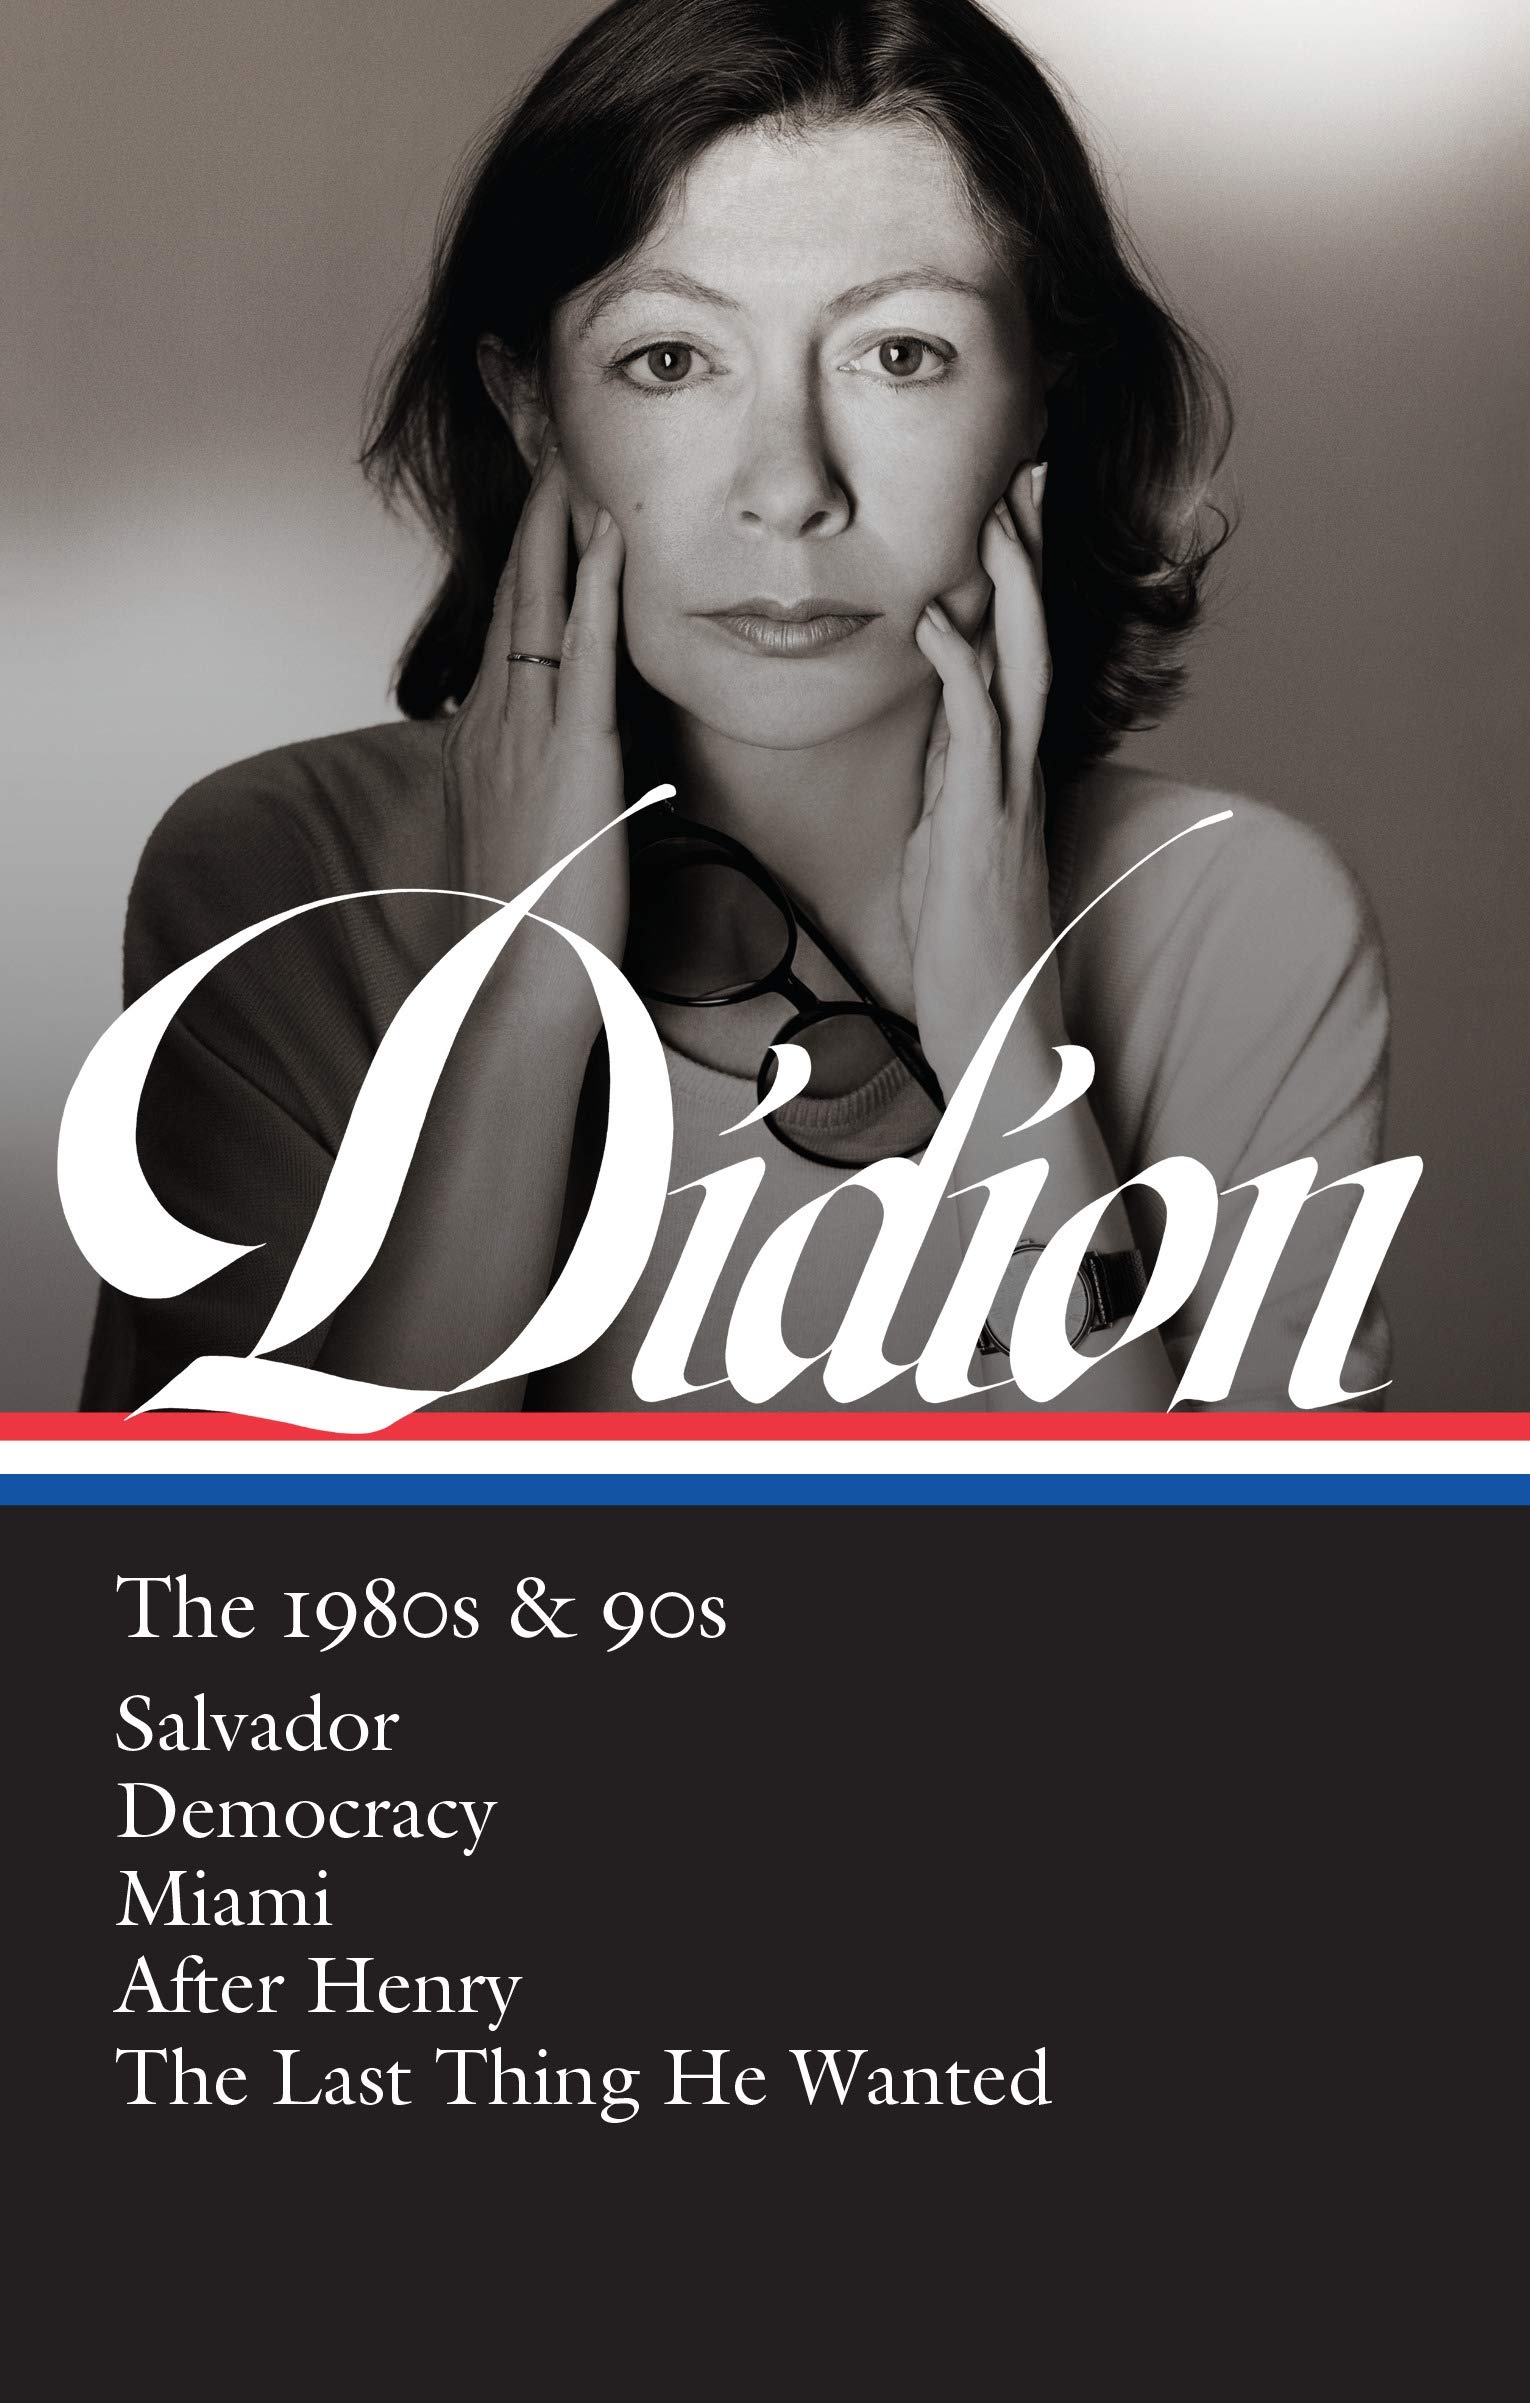 The Most Revealing Moment in the New Joan Didion Documentary